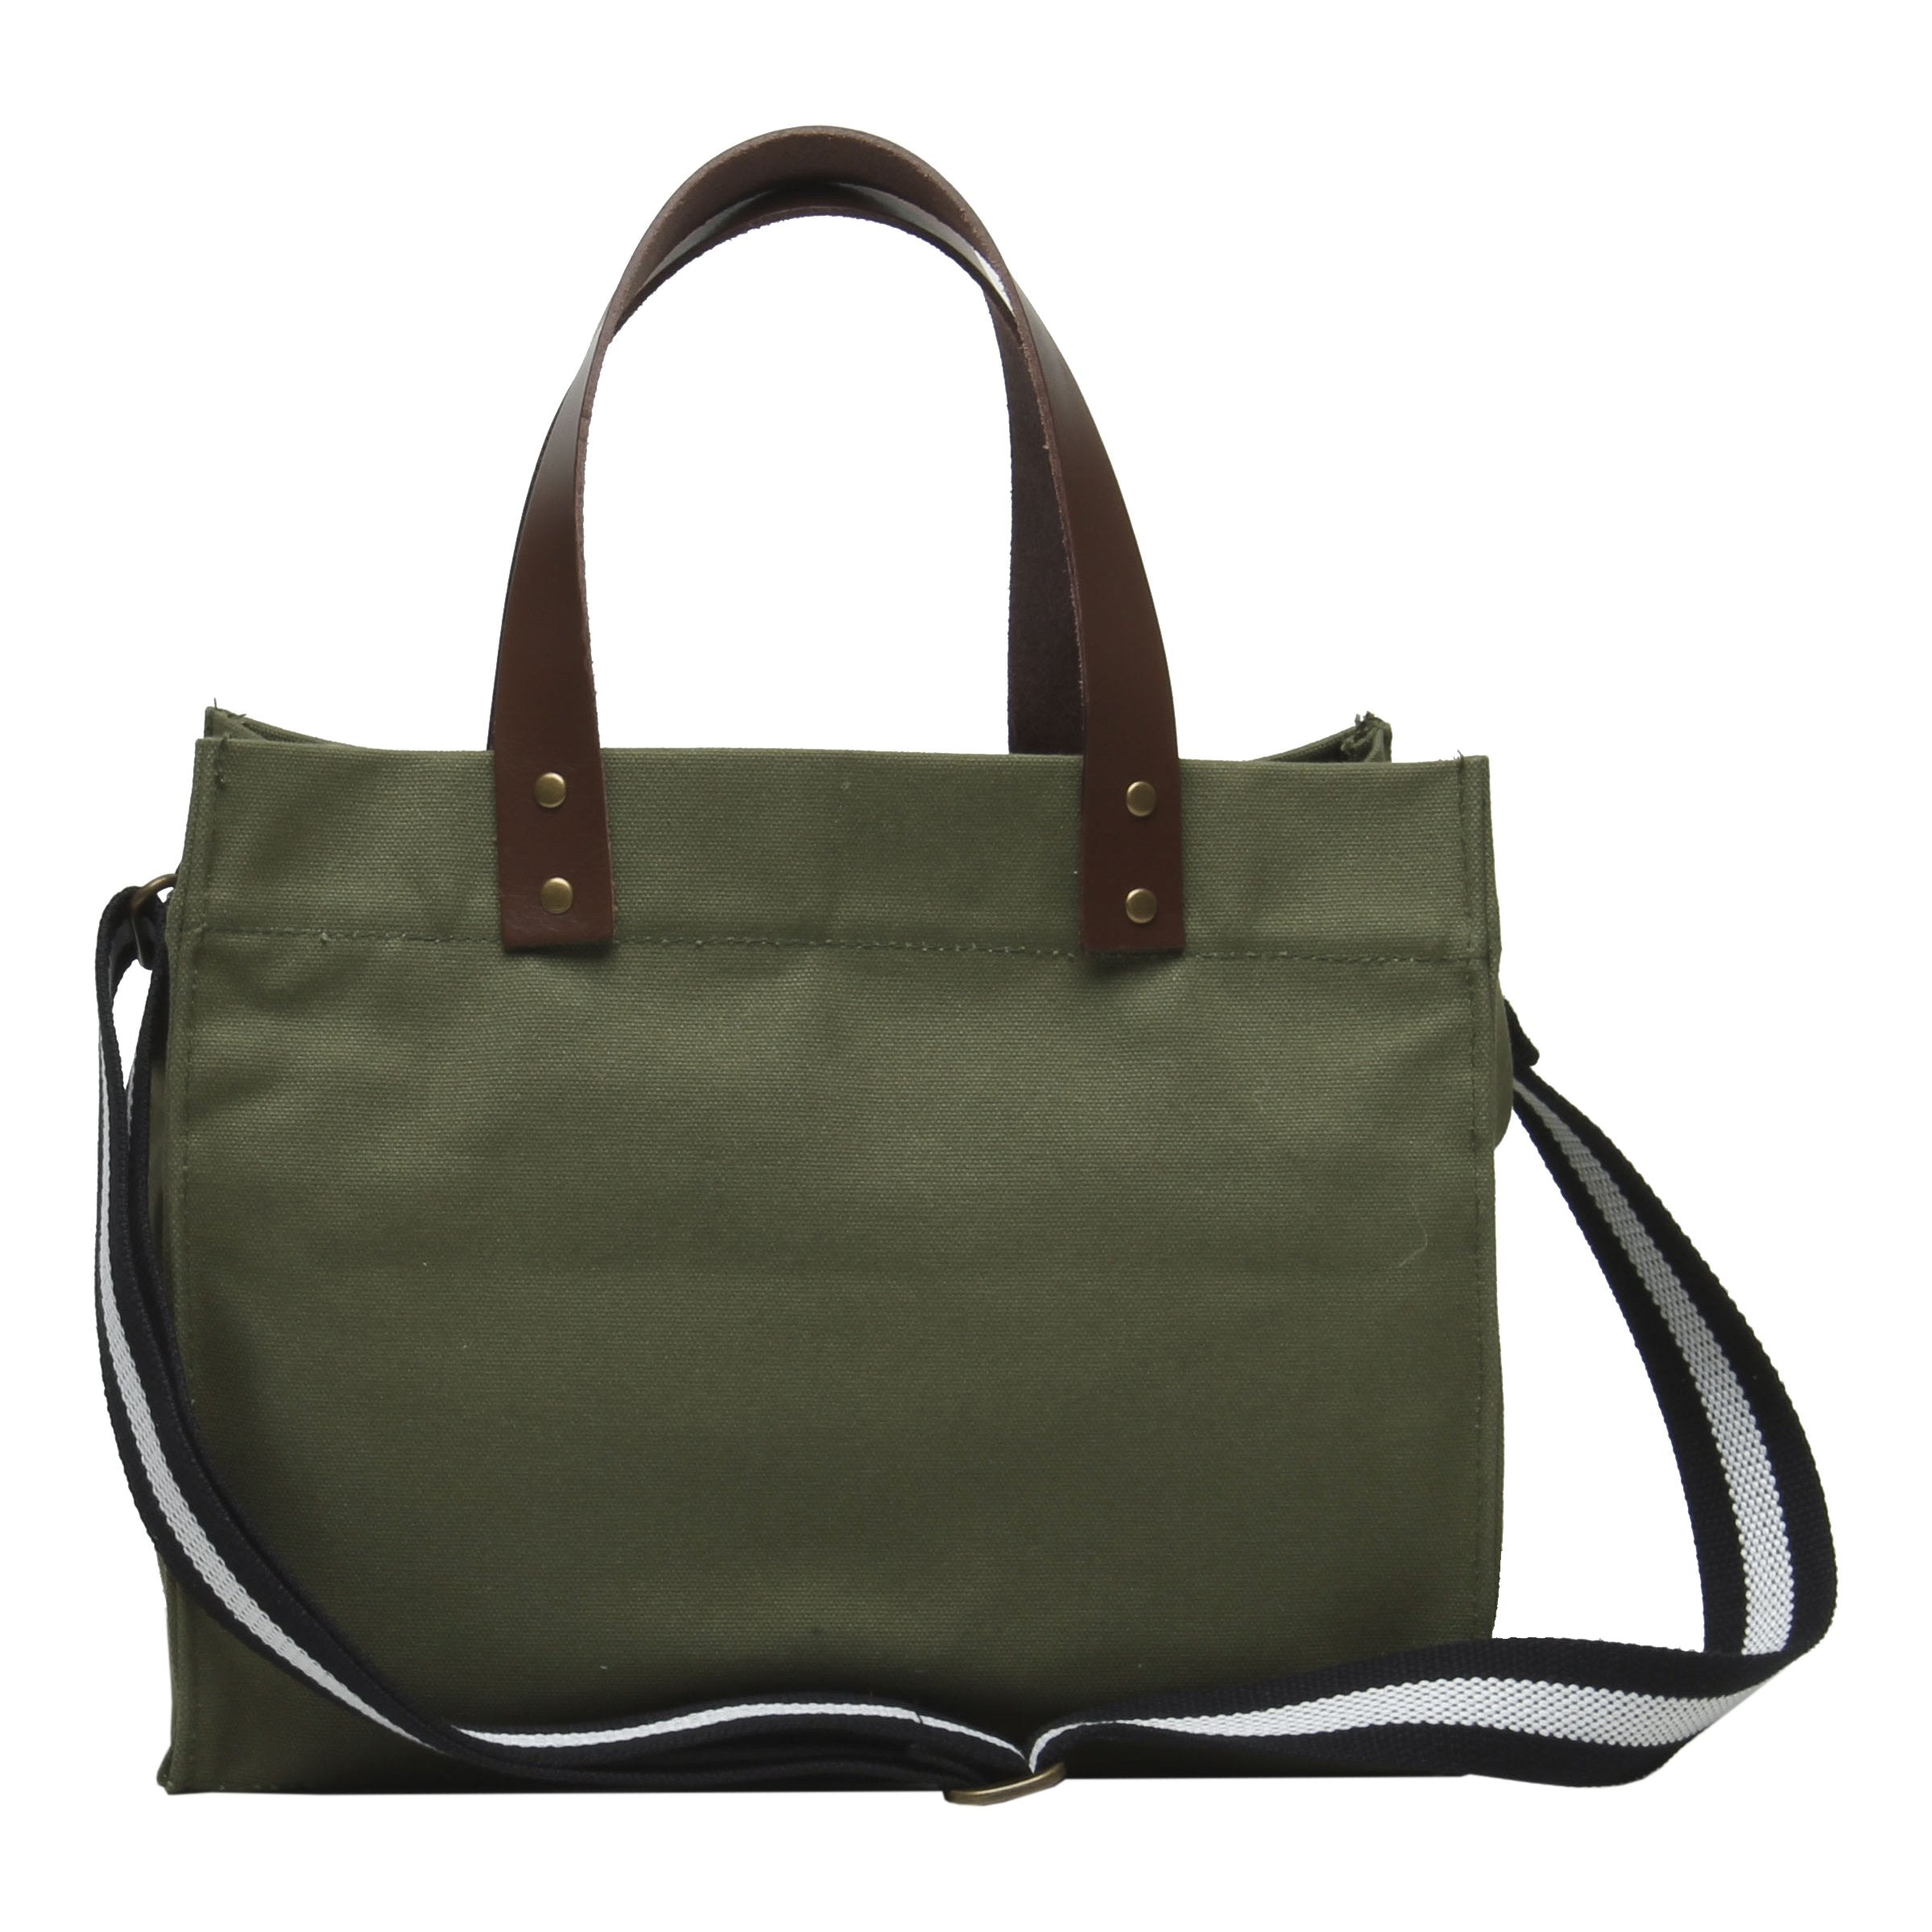 Brooklyn Tote with Cotton Web Straps - Tag&Crew